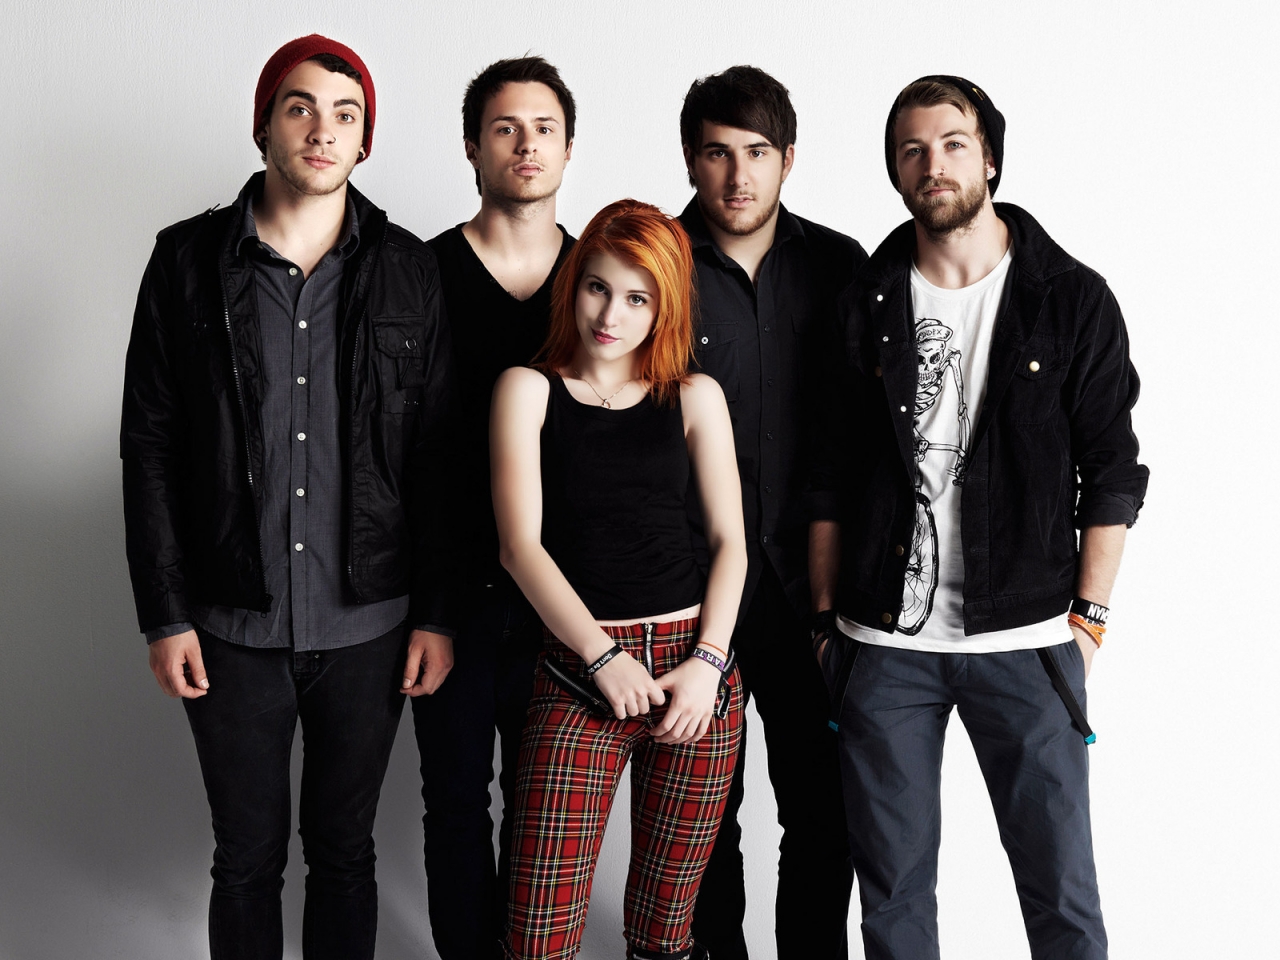 Hayley Williams and Paramore for 1280 x 960 resolution